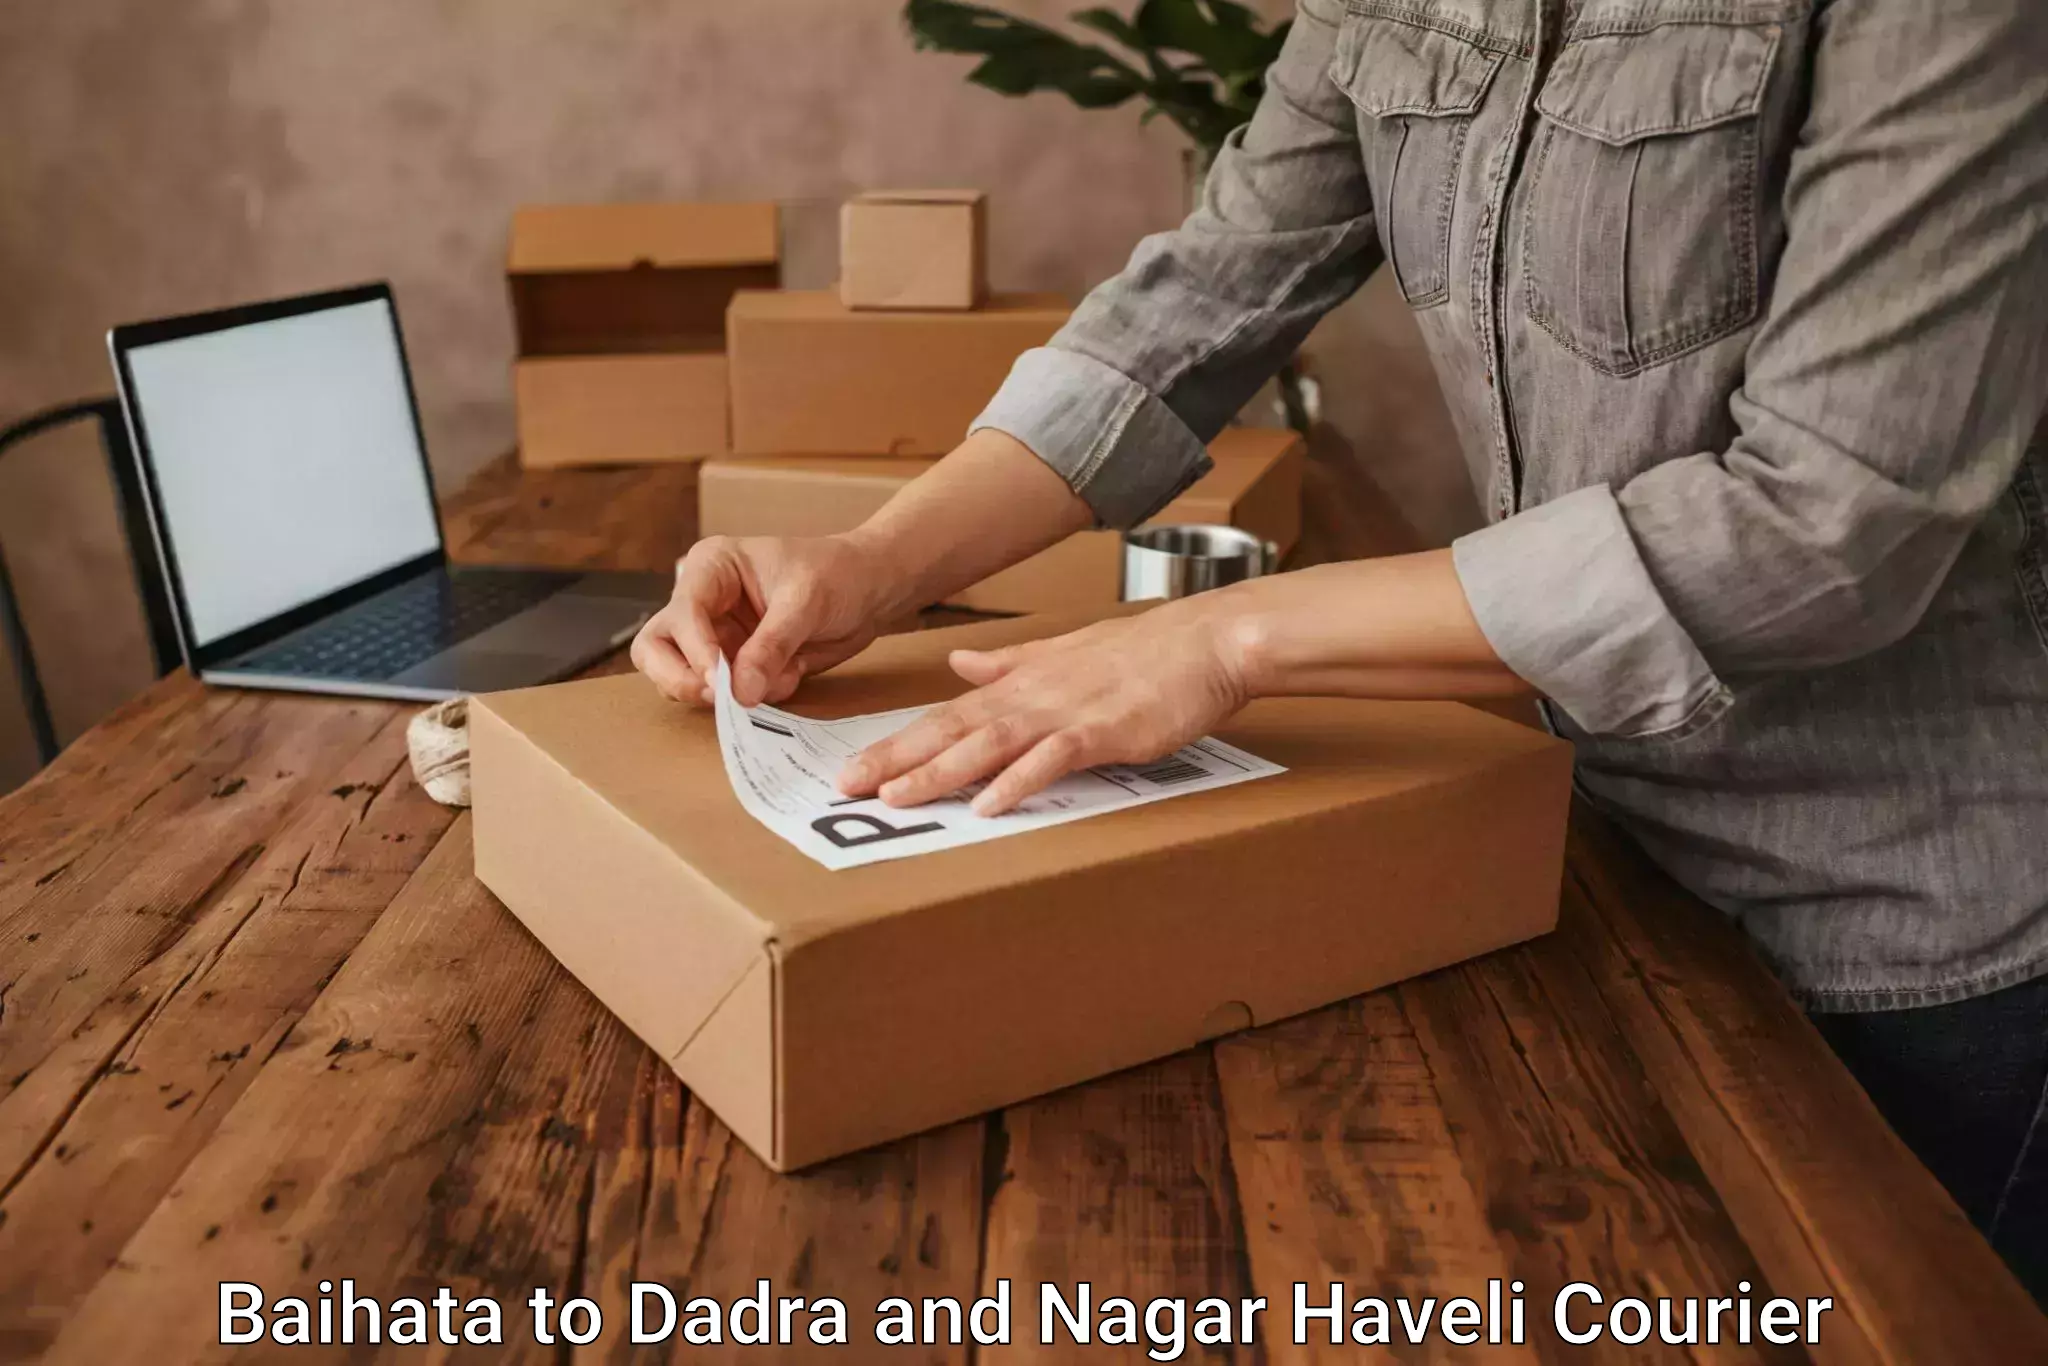 Package delivery network Baihata to Dadra and Nagar Haveli